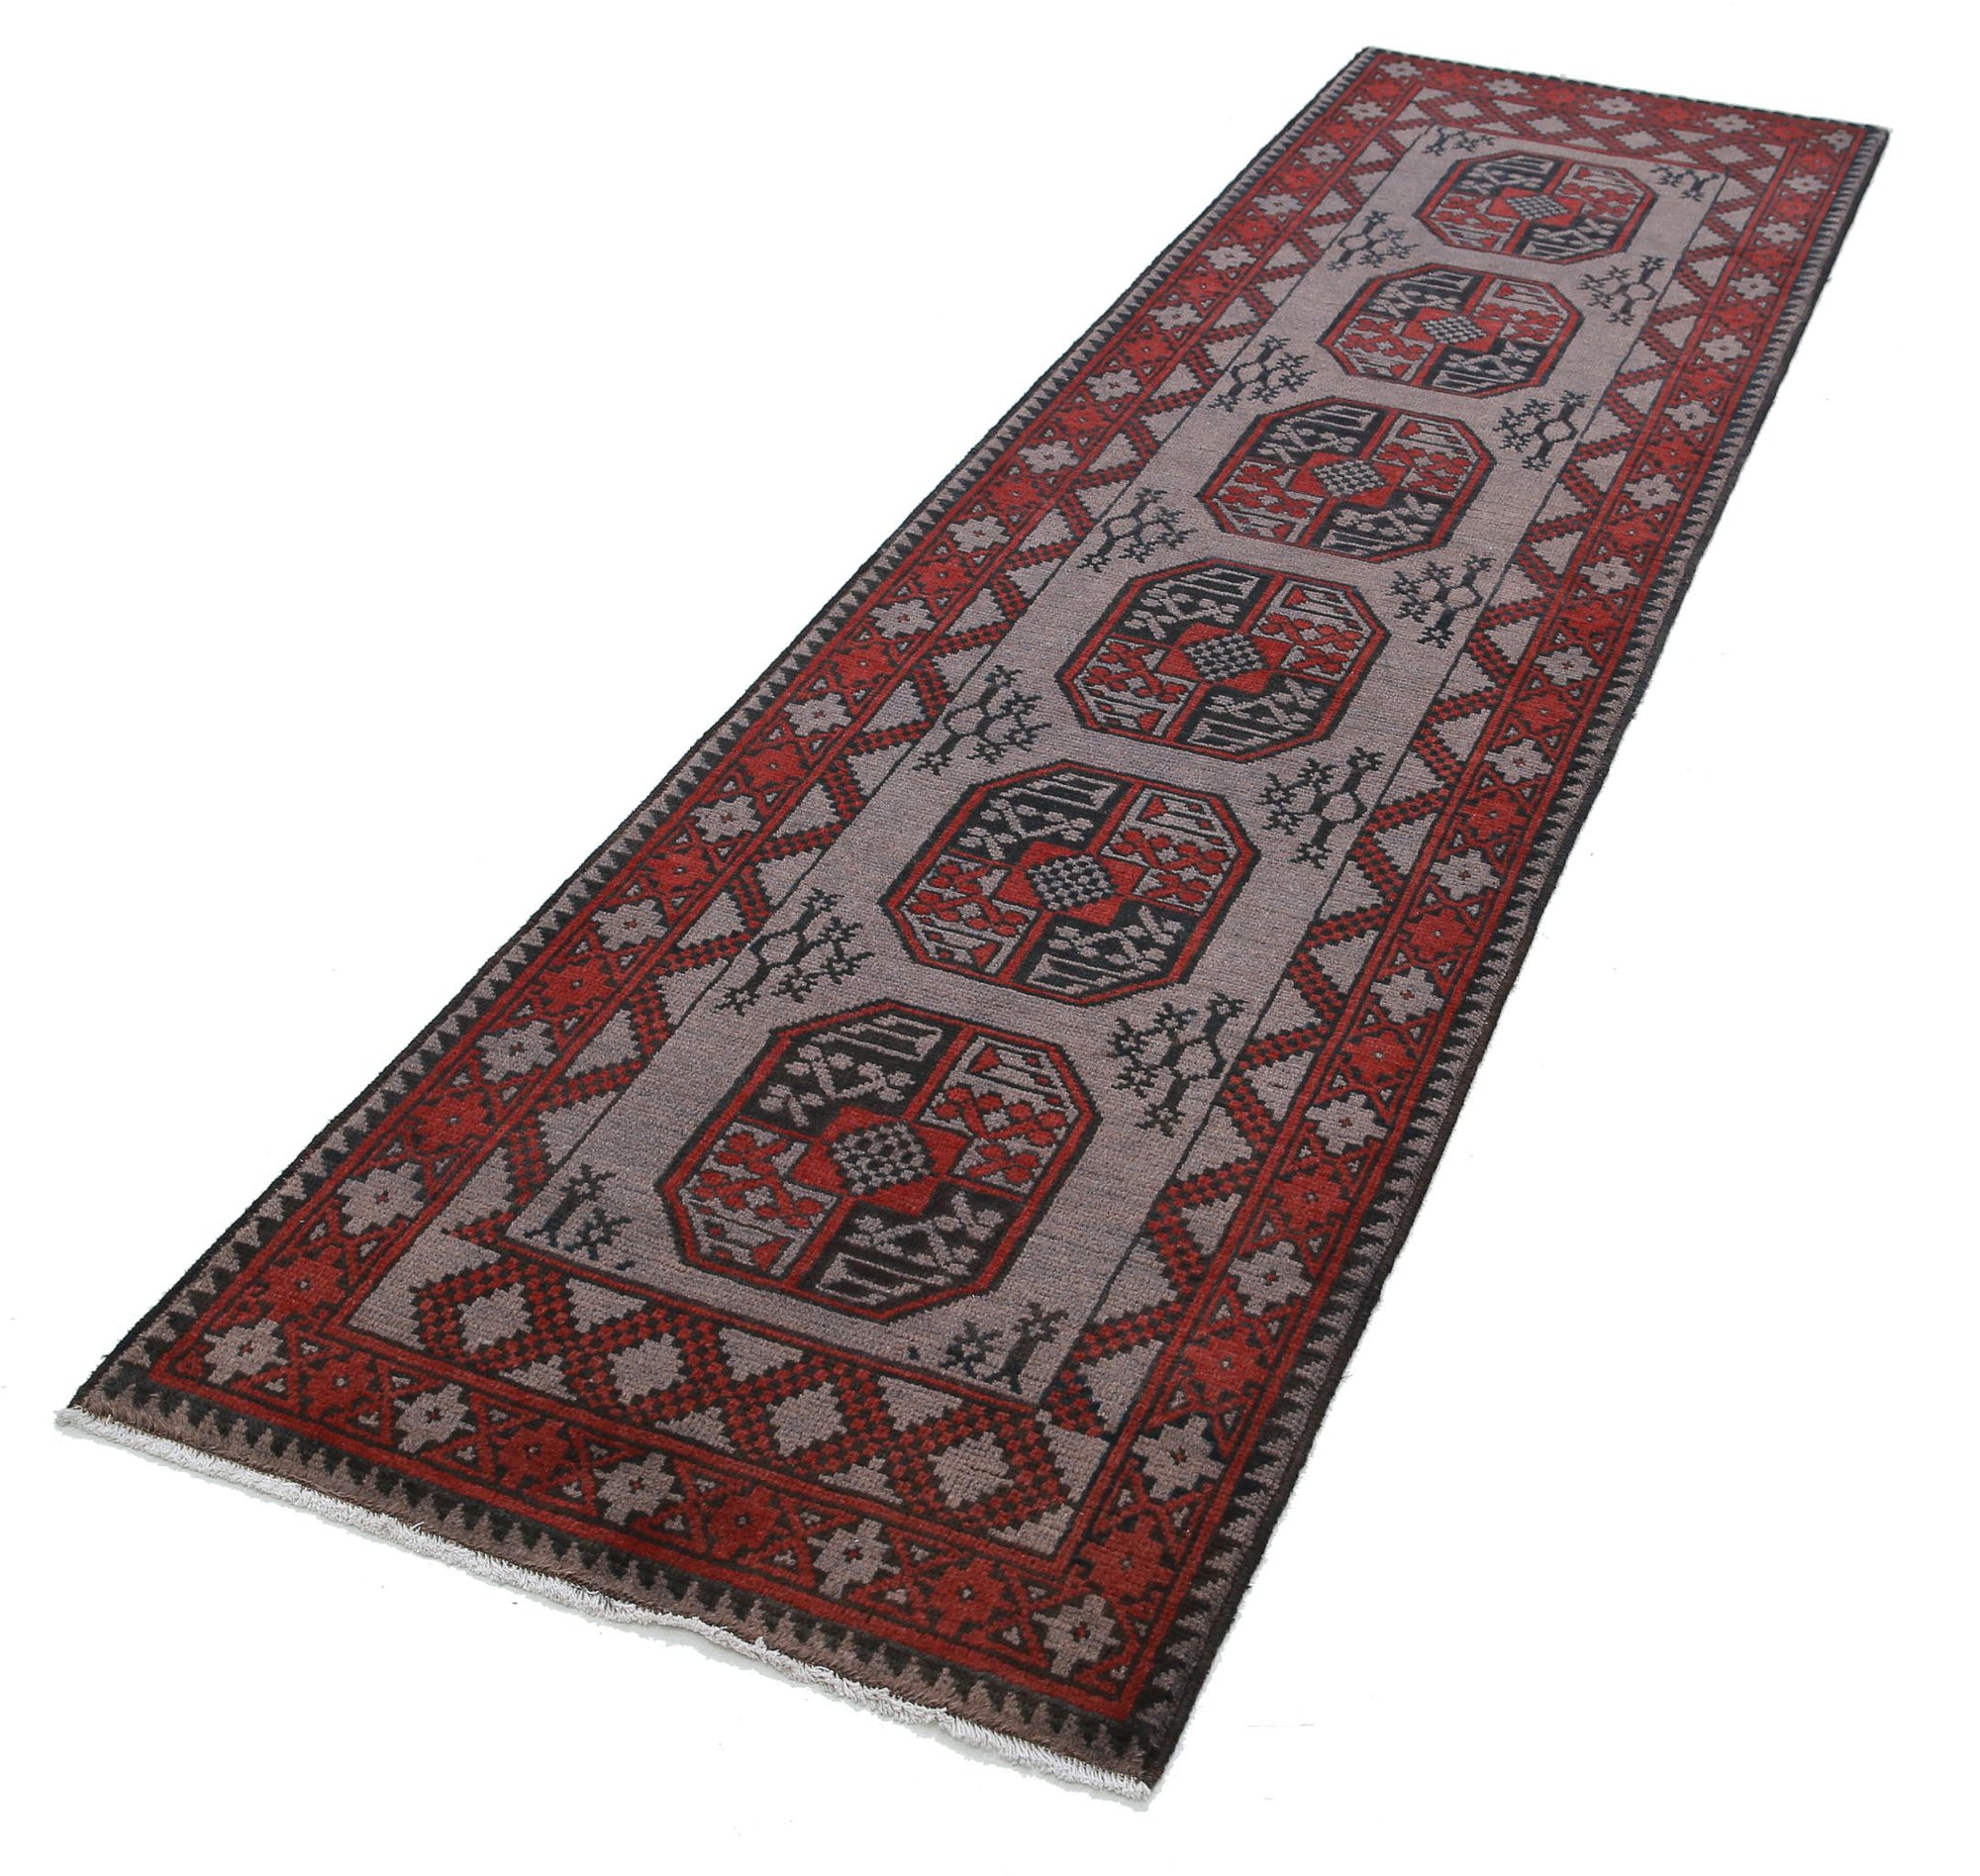 Revival-hand-knotted-gul-collection-wool-rug-5013988-2.jpg